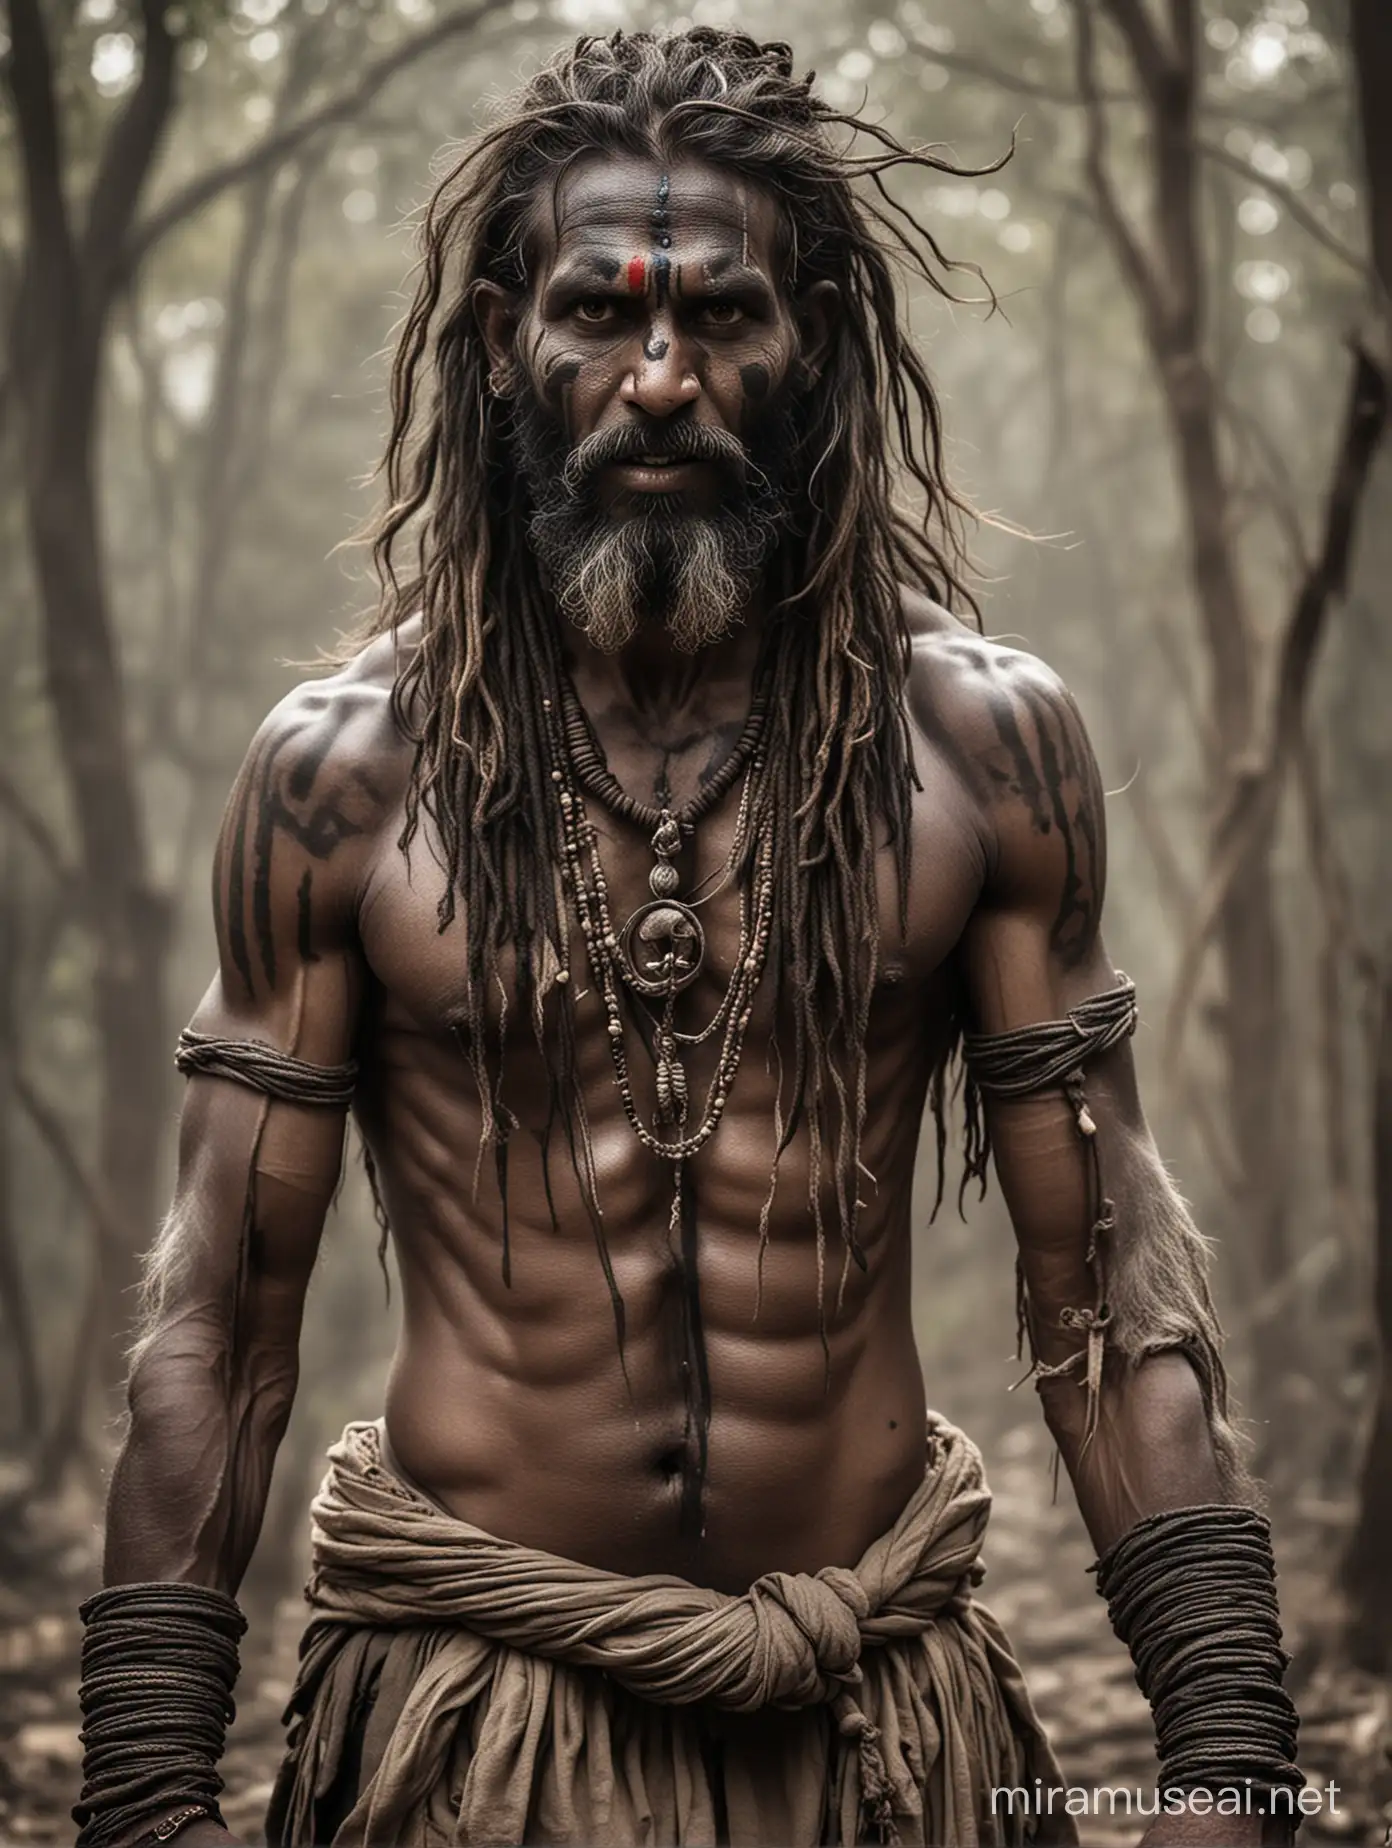 Furious Indian Aghori Warrior Restoring Faith in Humanity for Akhand Bharat